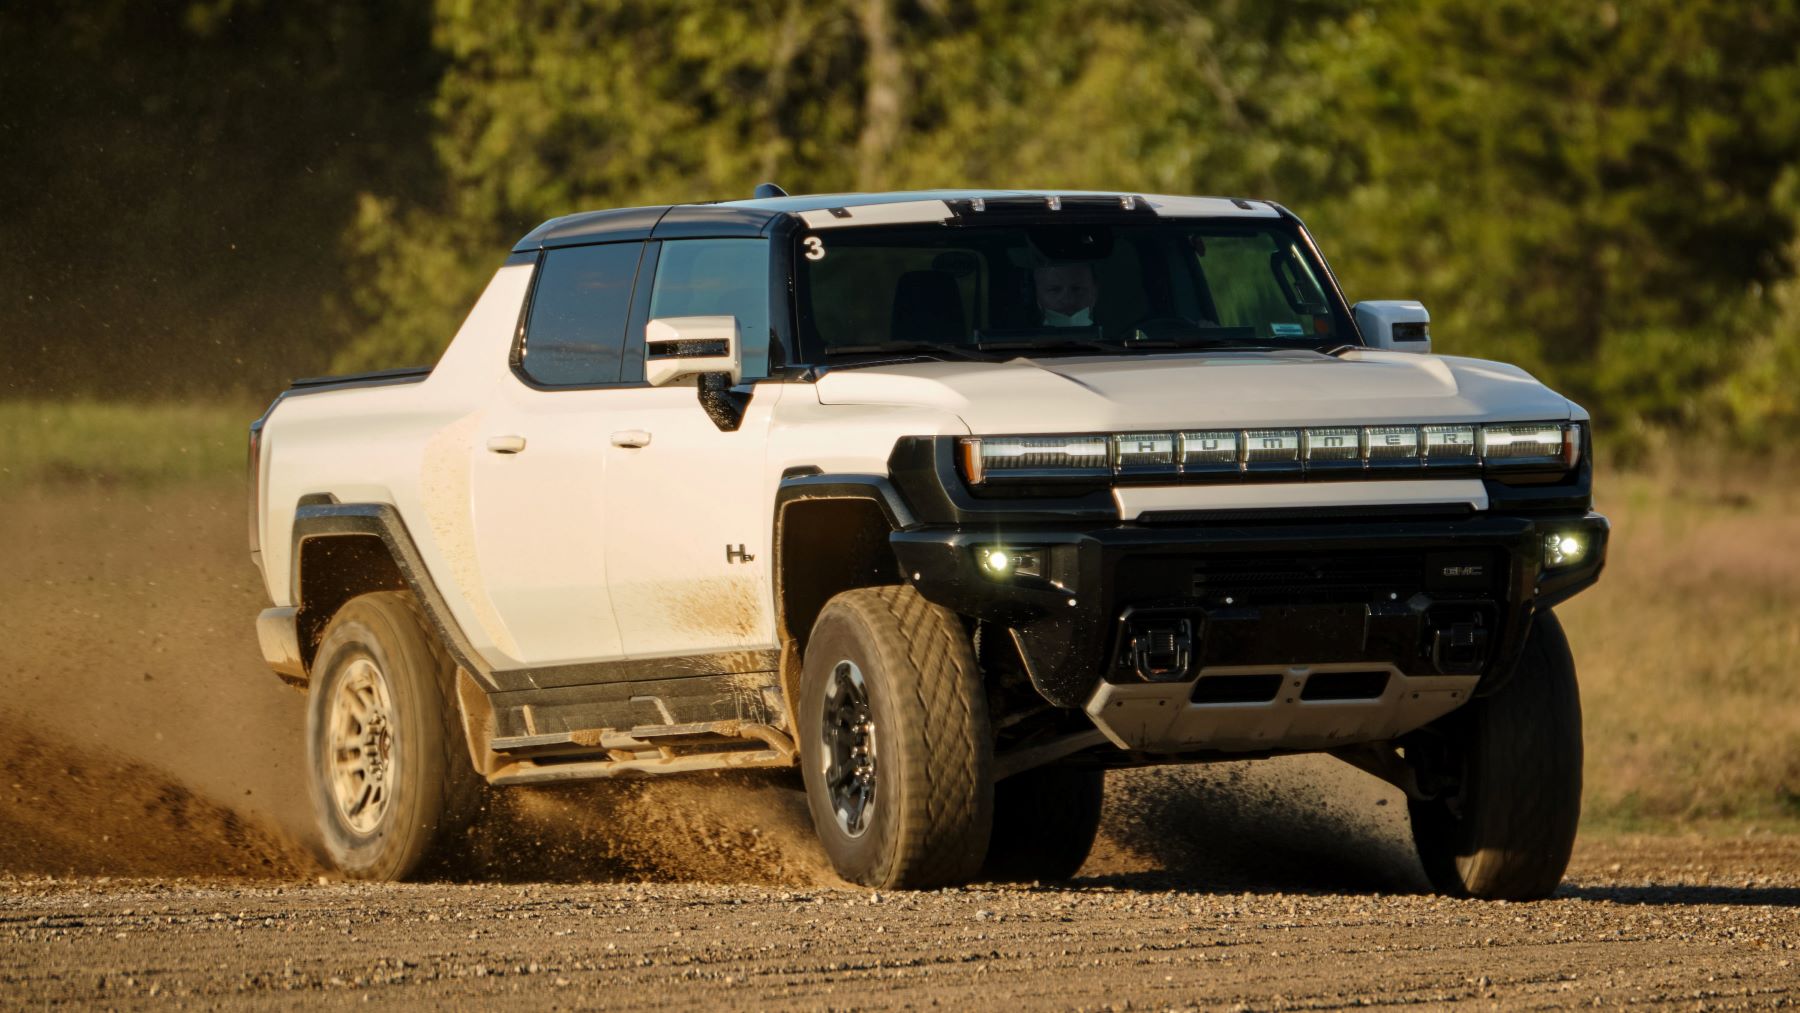 A white GMC Hummer EV electric pickup truck with over 10 inches of ground clearance driving on a dirt field